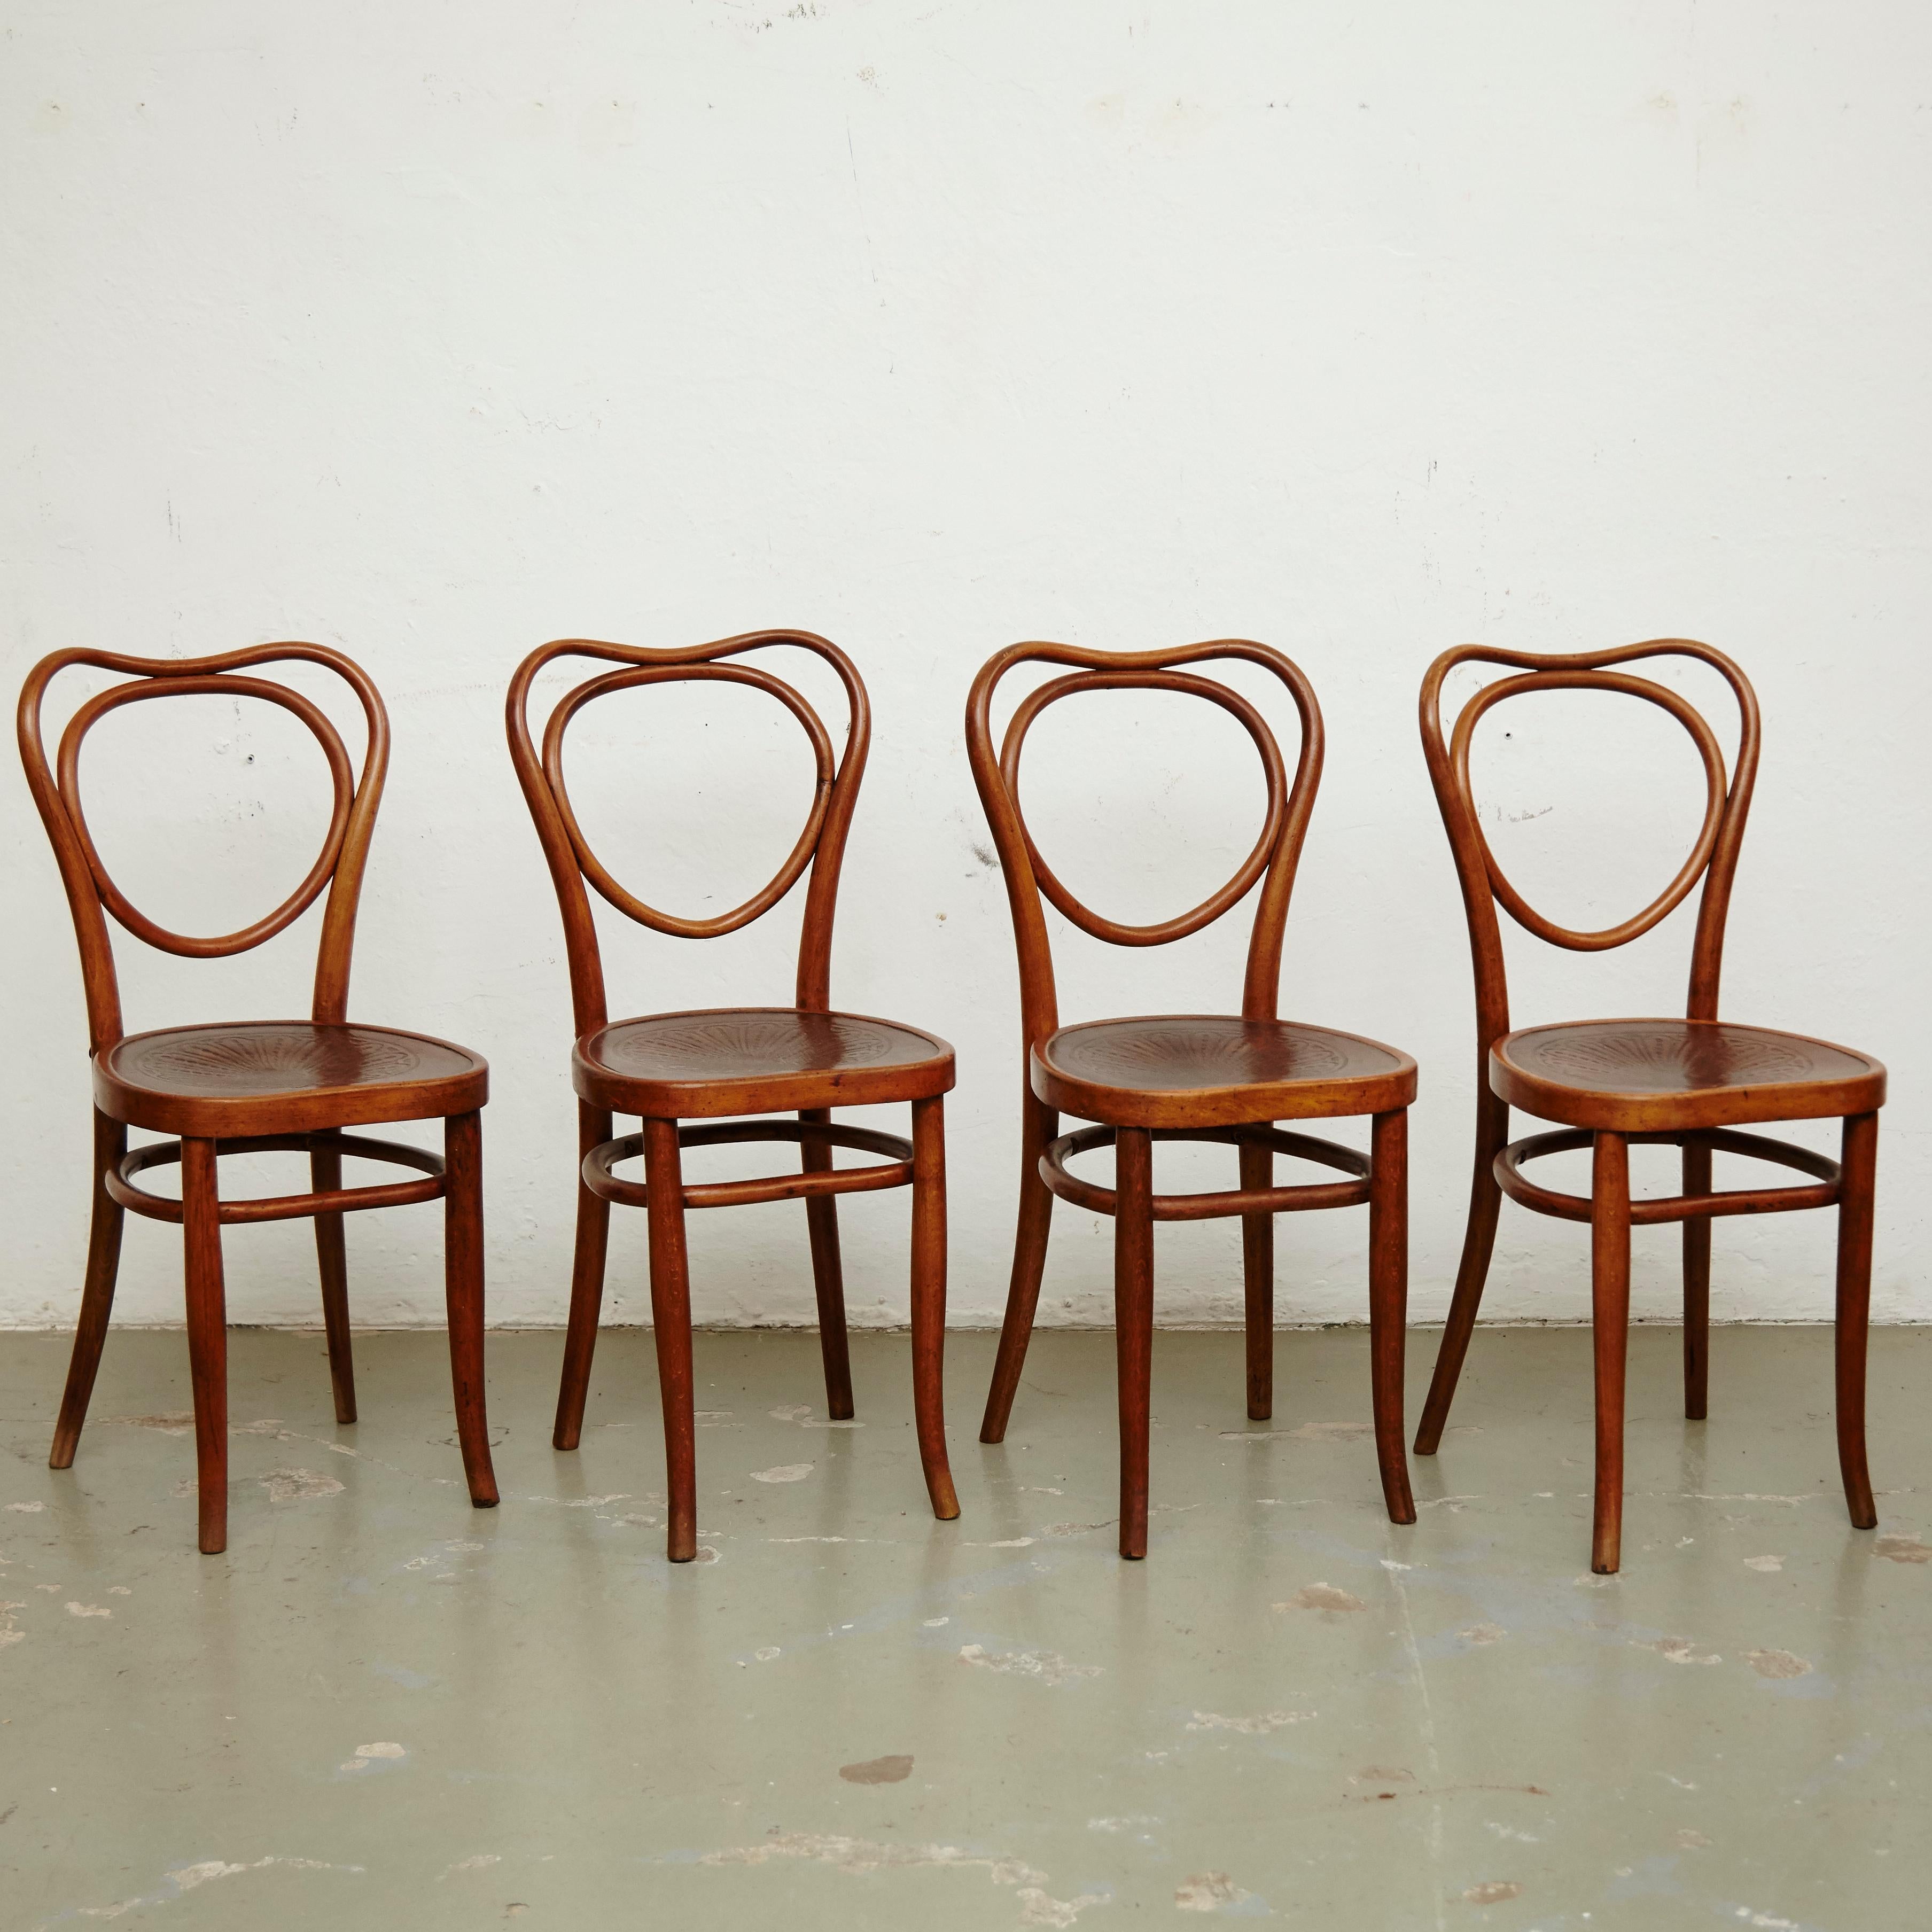 Chairs designed by J & J. Khon, circa 1900 manufactured in Austria.

In great original condition, with minor wear consistent with age and use, preserving a beautiful patina.

Jacob & Josef Kohn, also known as J. & J. Kohn, was an Austrian